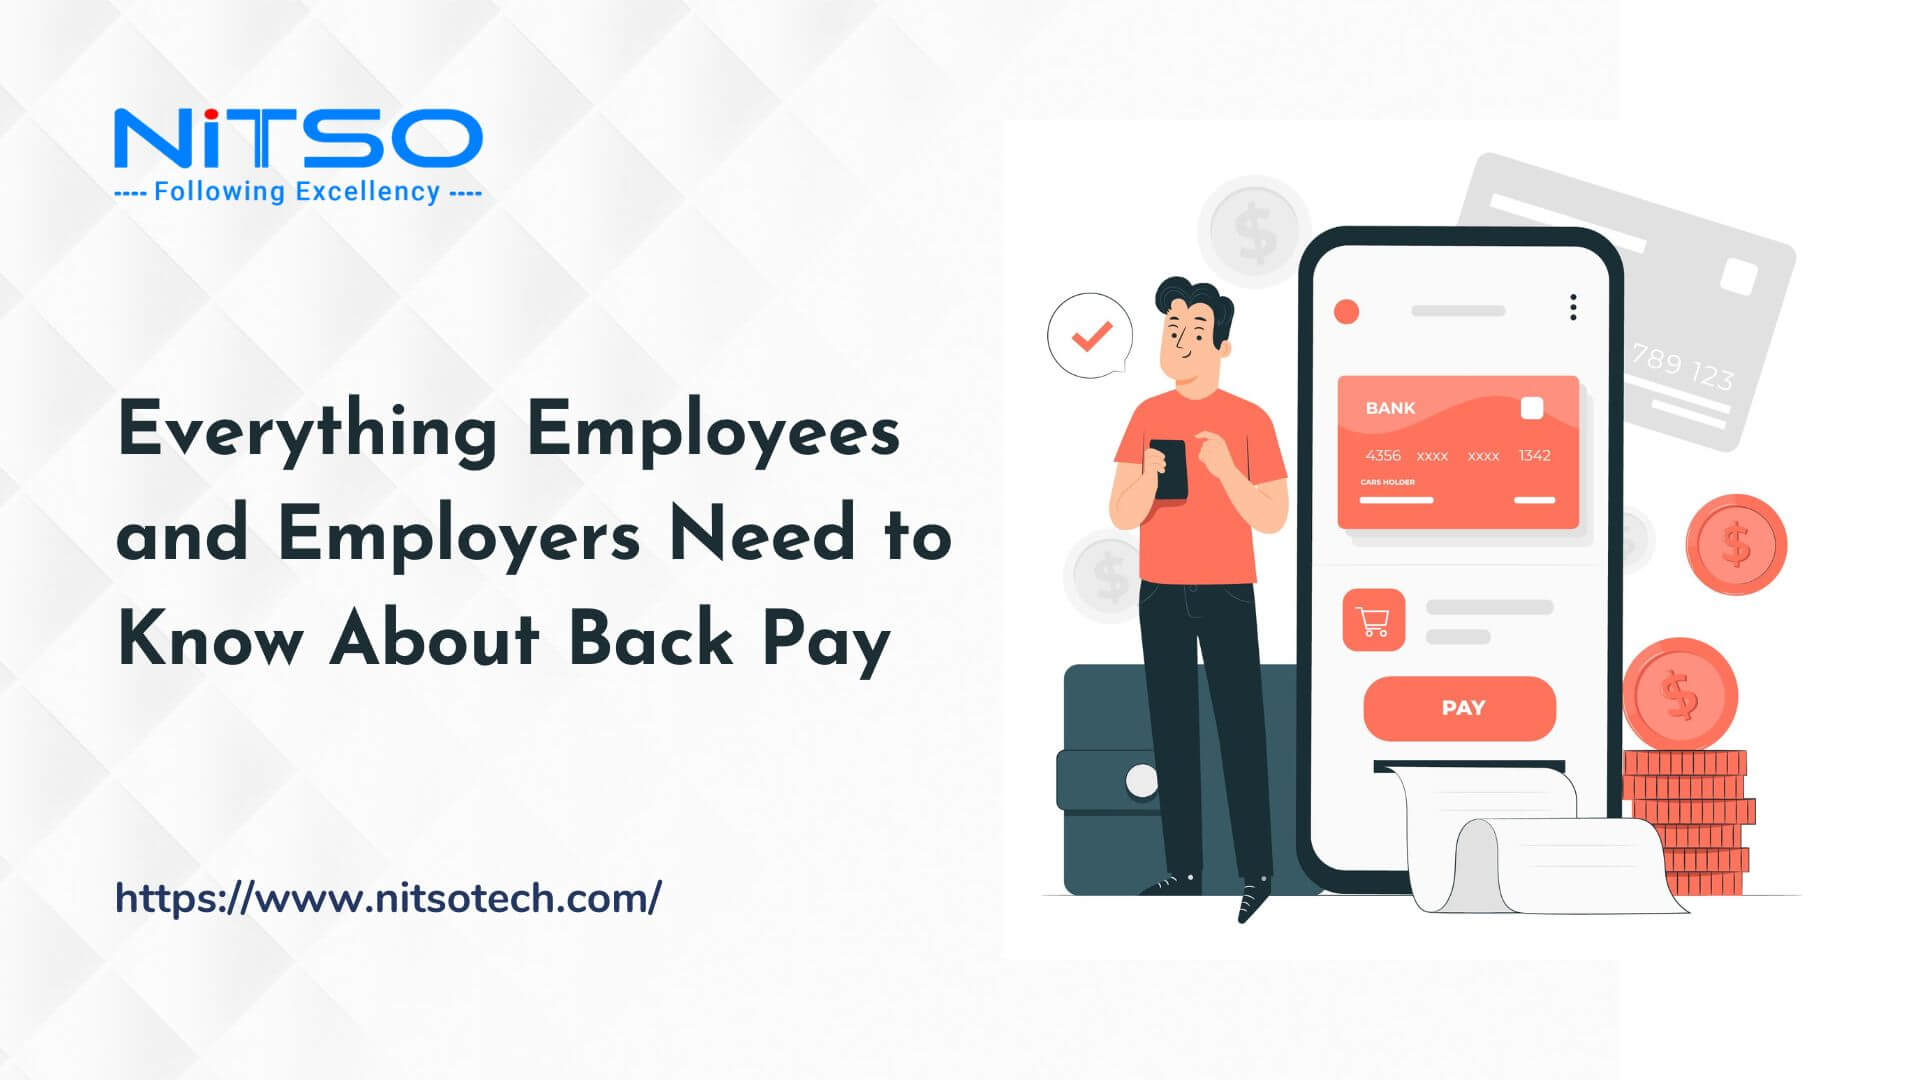 what is back pay or back payment vs Retro Pay